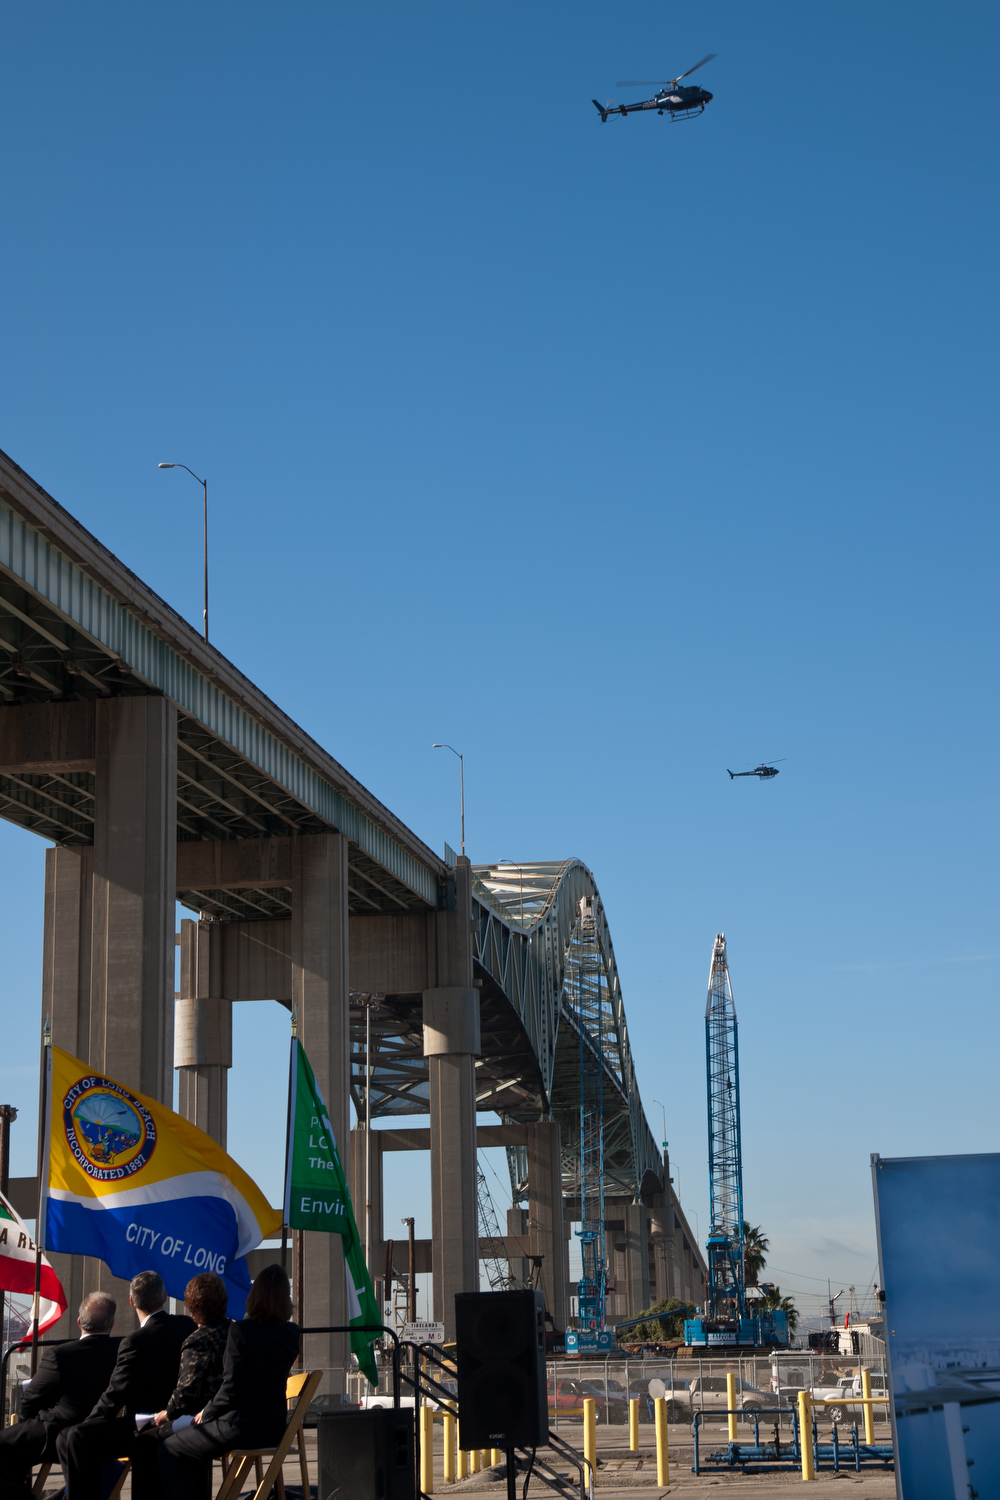 Groundbreaking on the Gerald Desmond Bridge Replacement Project, 2013. The helicopters are hovering at 515 feet, the eventual height of the new bridgeÕs towers.